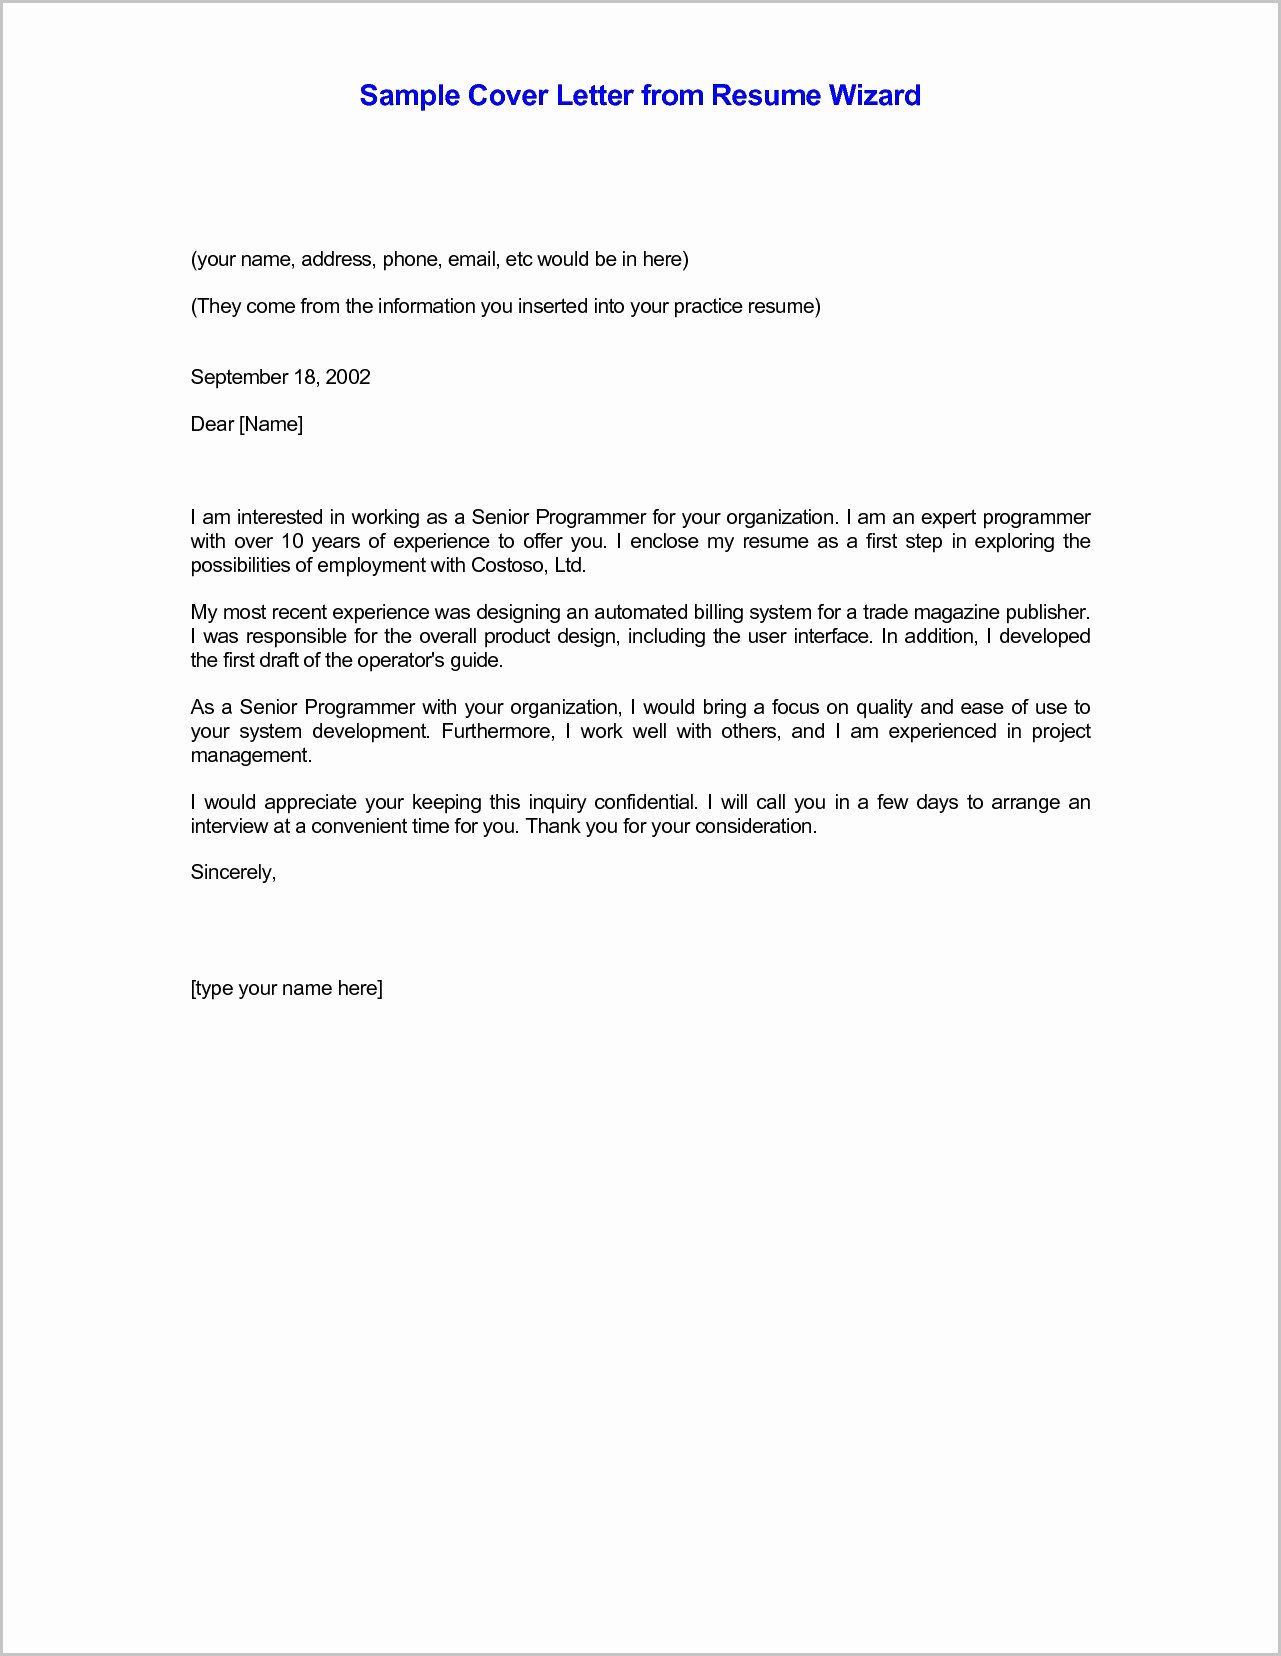 Email Cover Letter Template Elegant How to Write An Email Cover Letter Sample